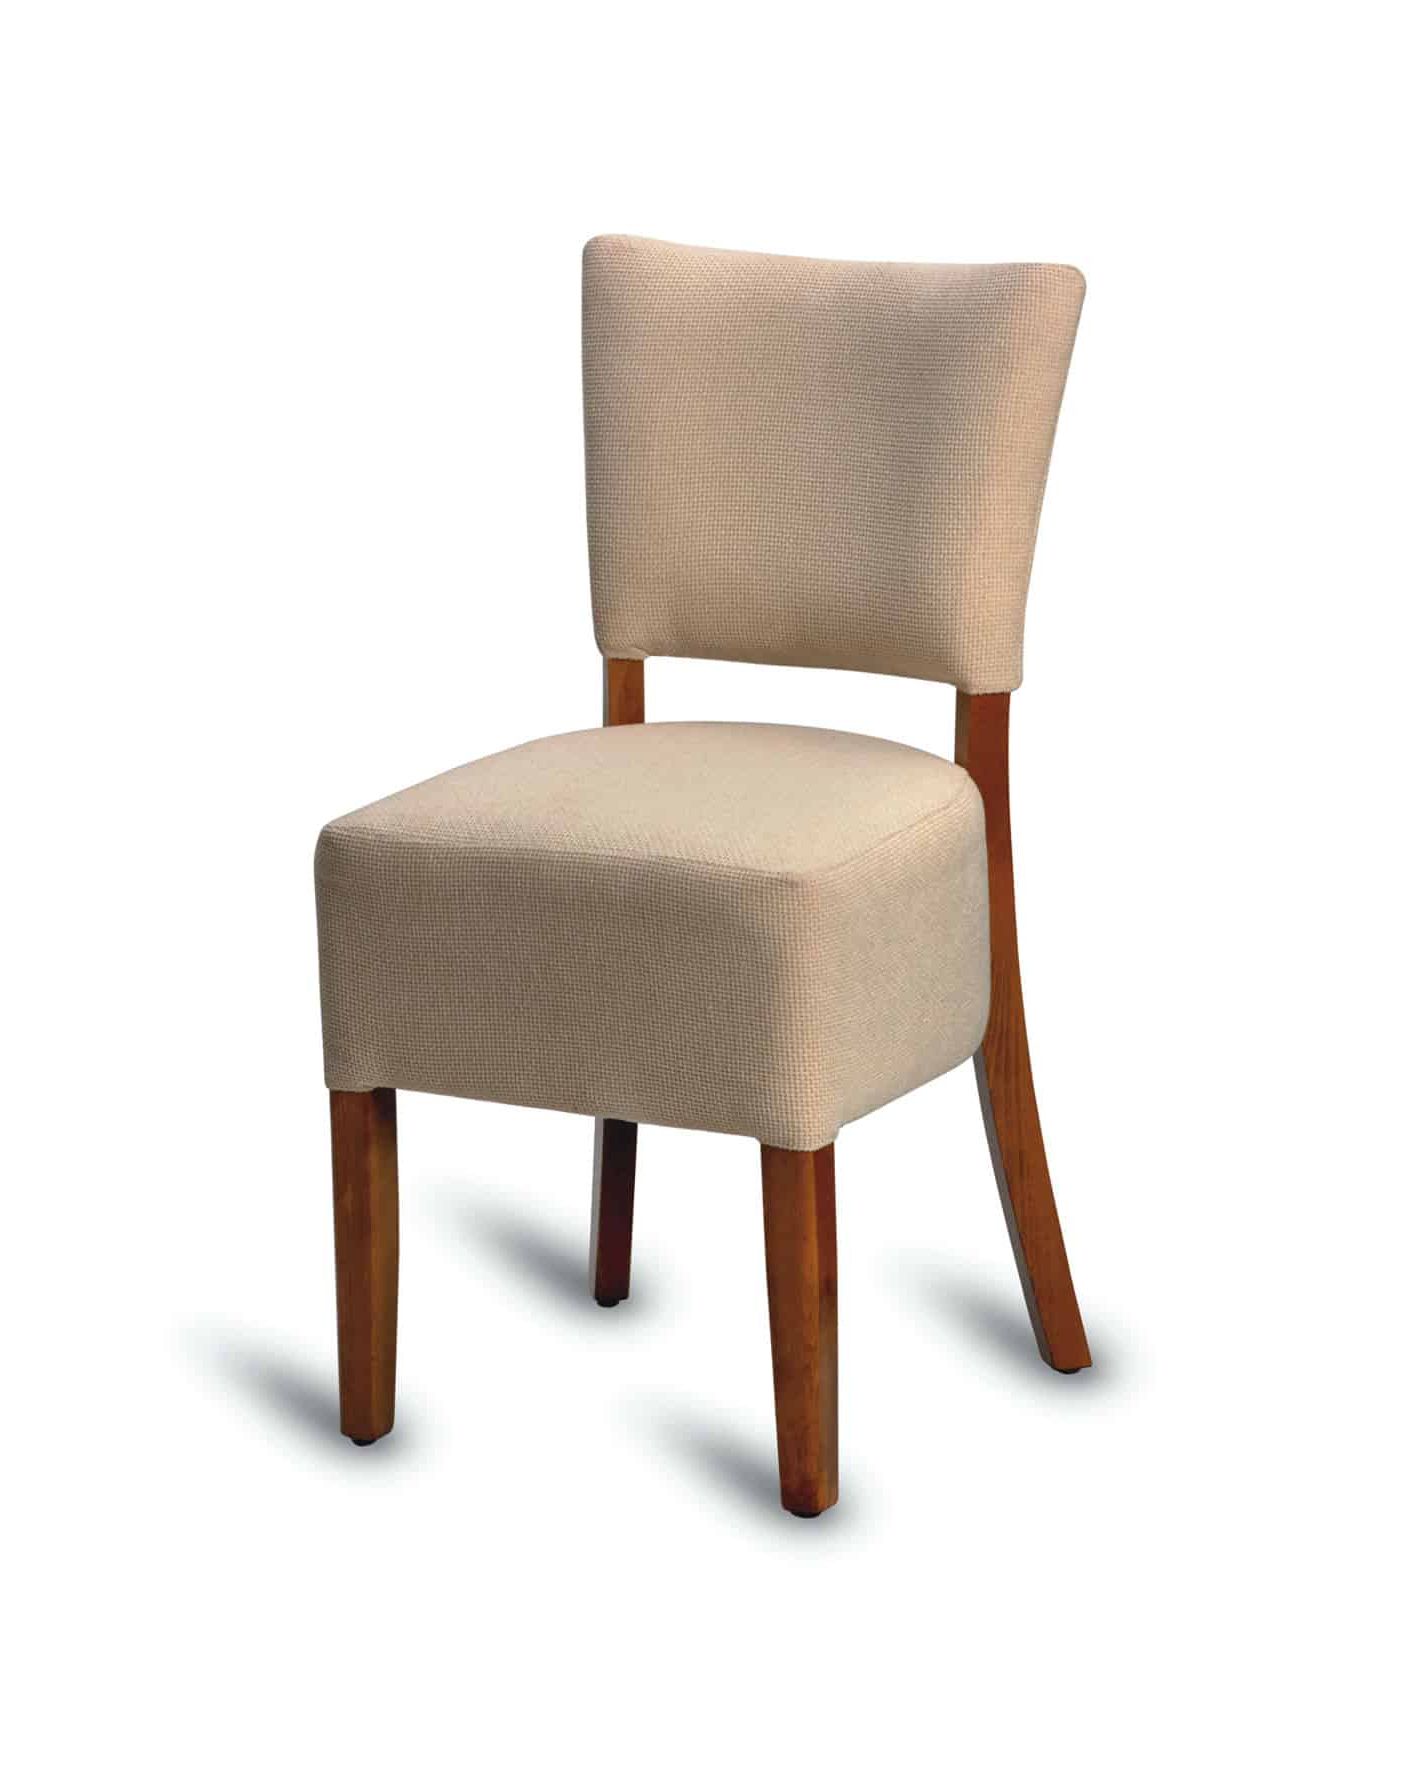 Trent Side Chairs Pertaining To Fashionable Trent Side Chair – Uph – Irish Contract Seating (View 12 of 20)